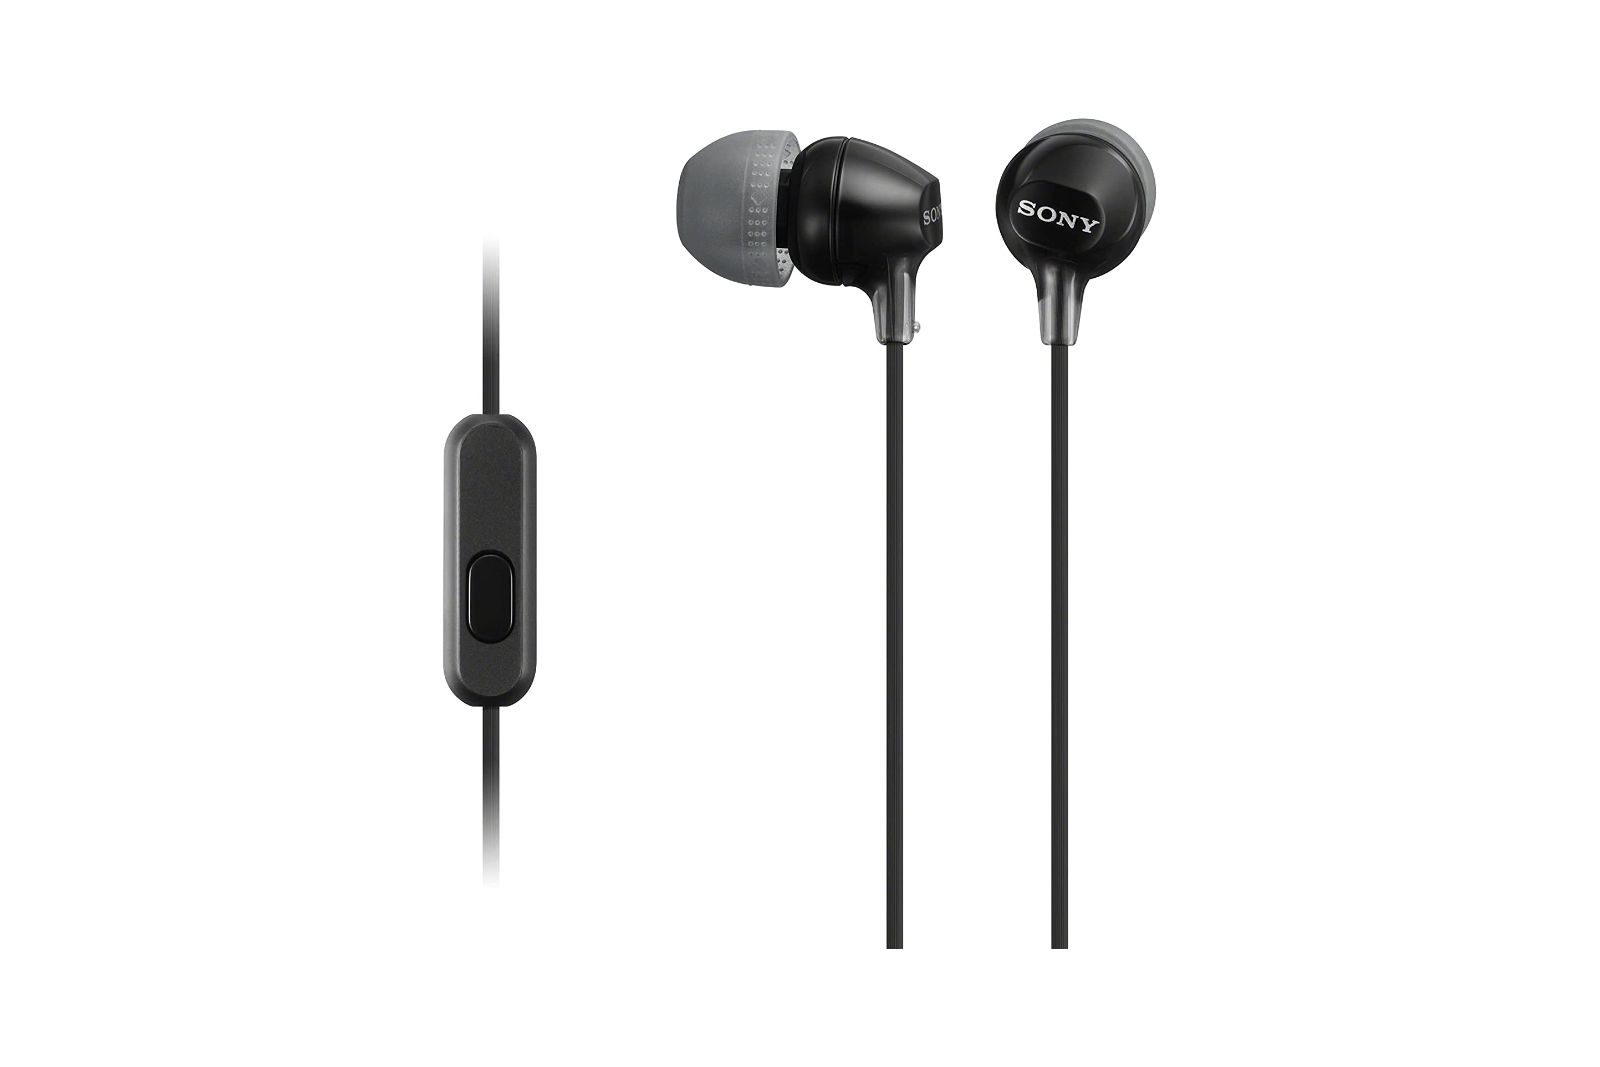 Black, wired Sony-branded in-ear headphones with a capsule microphone and rubber ear tips.